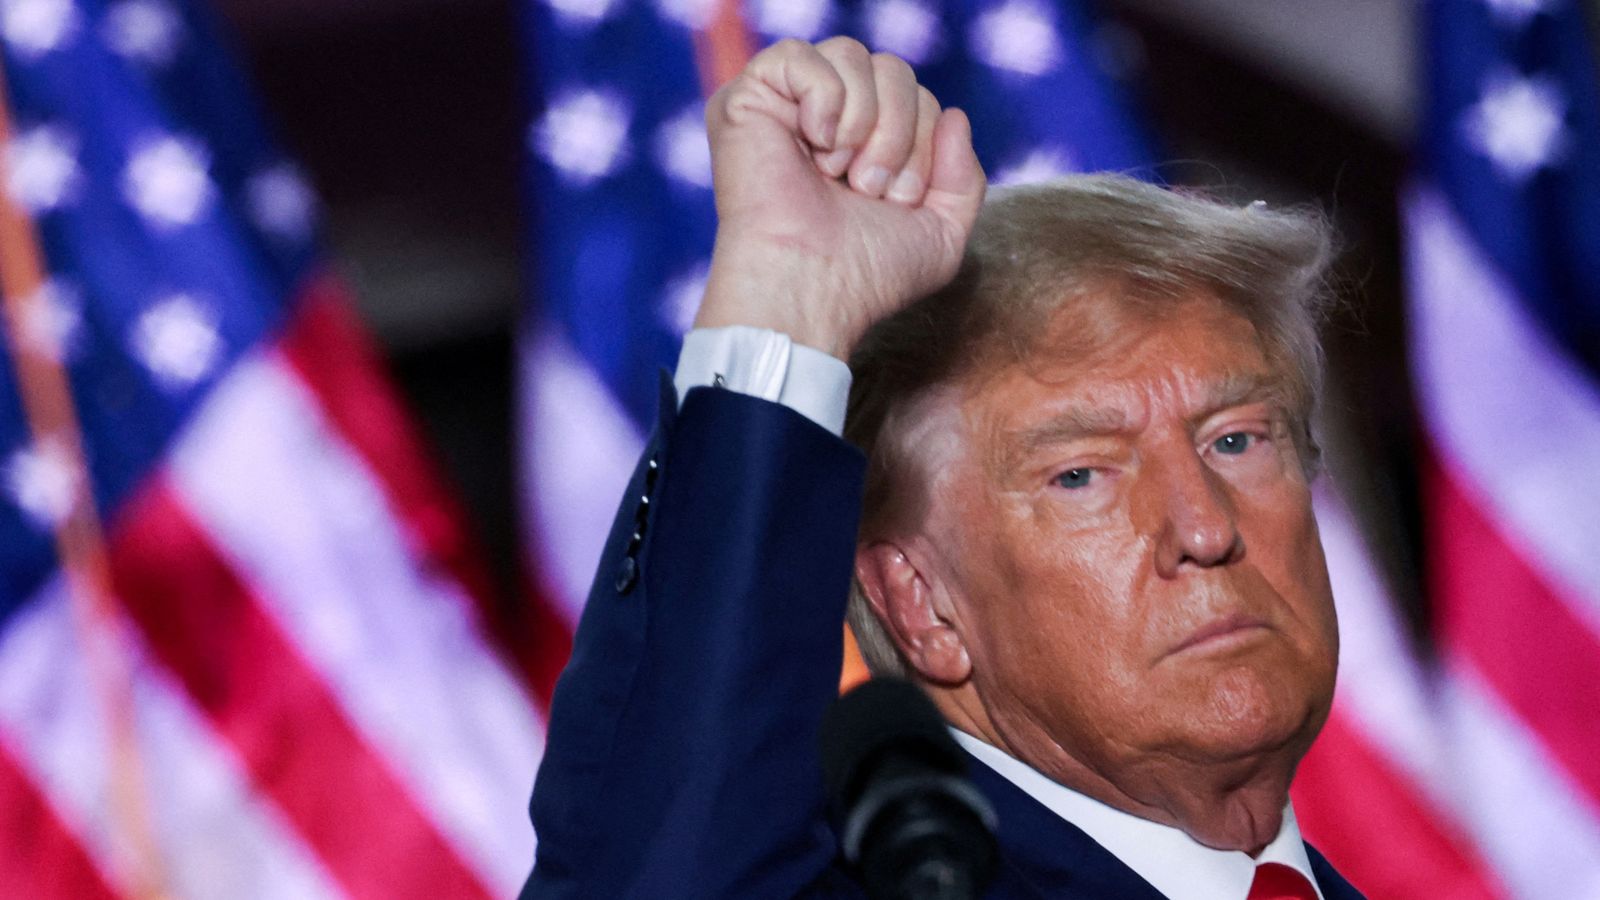 Donald Trump facing four charges over efforts to overturn 2020 election result